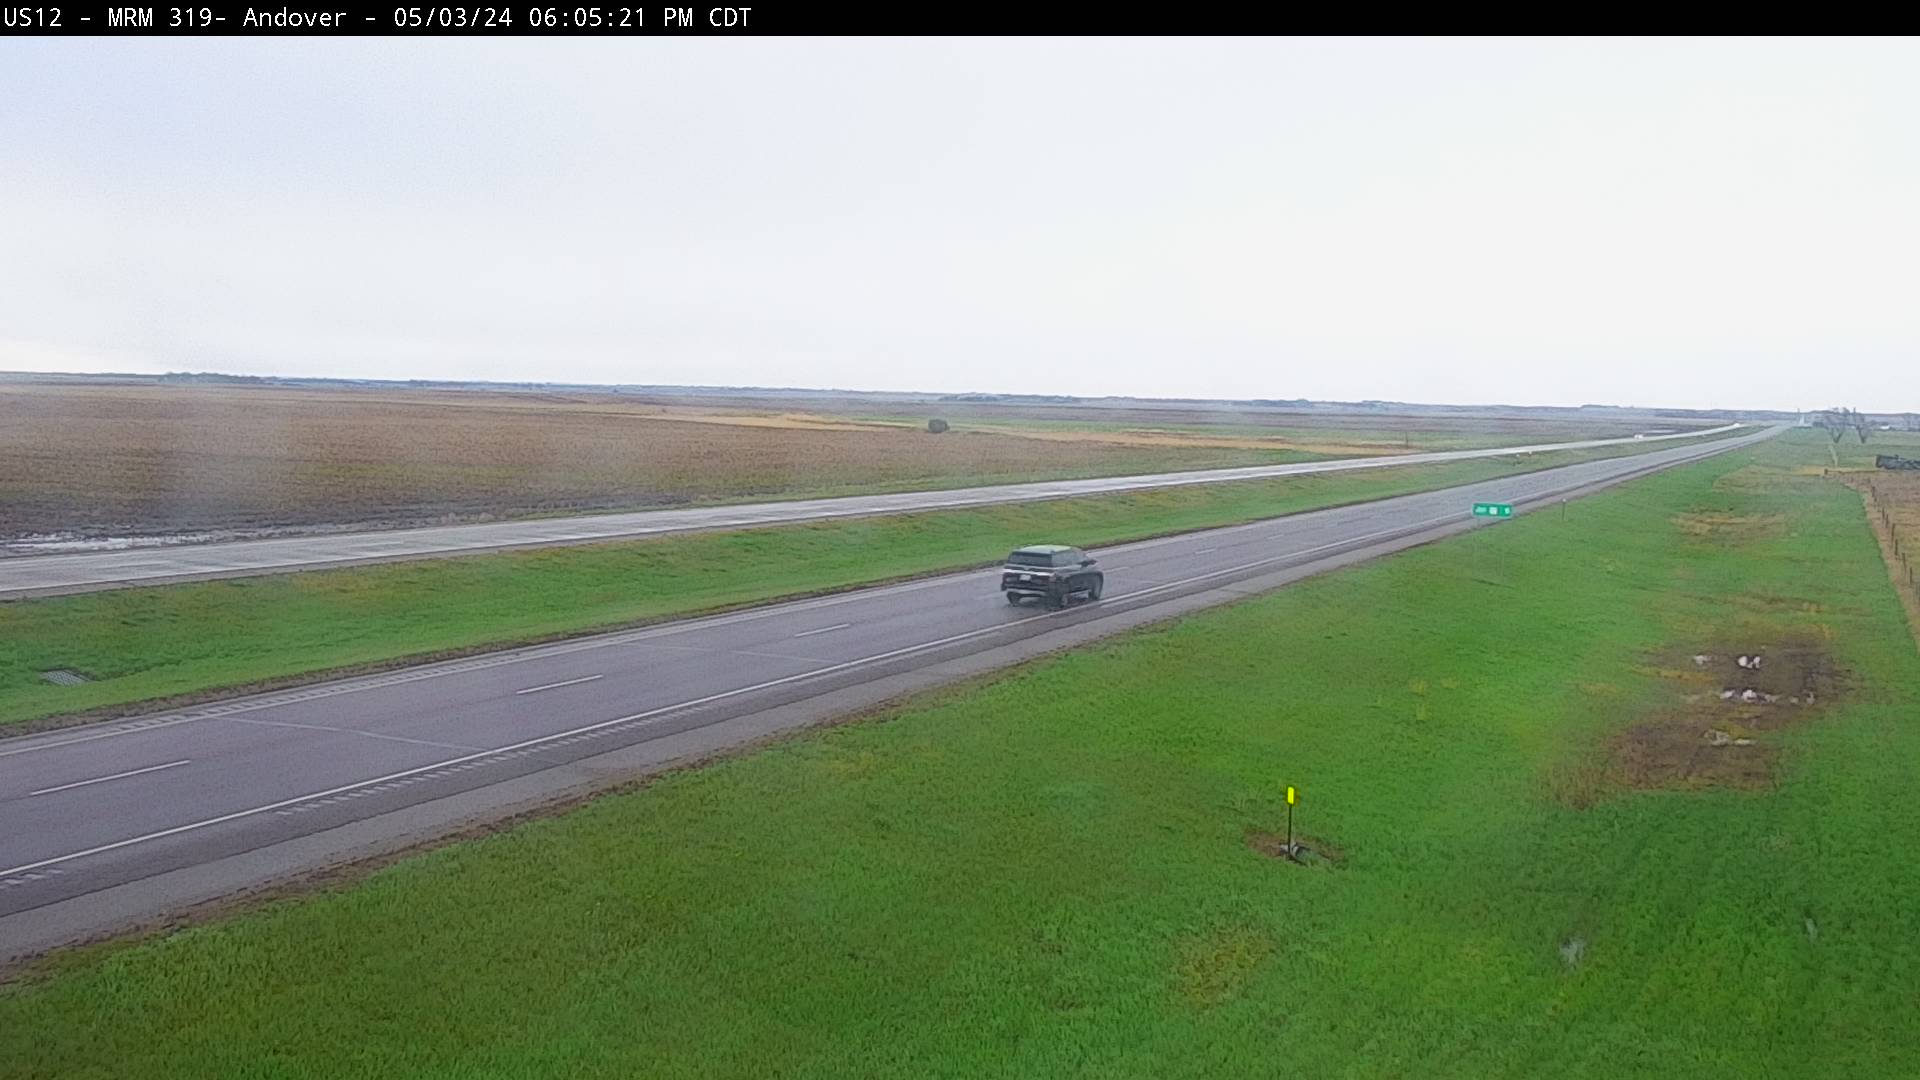 North of town along US-12 - East Traffic Camera